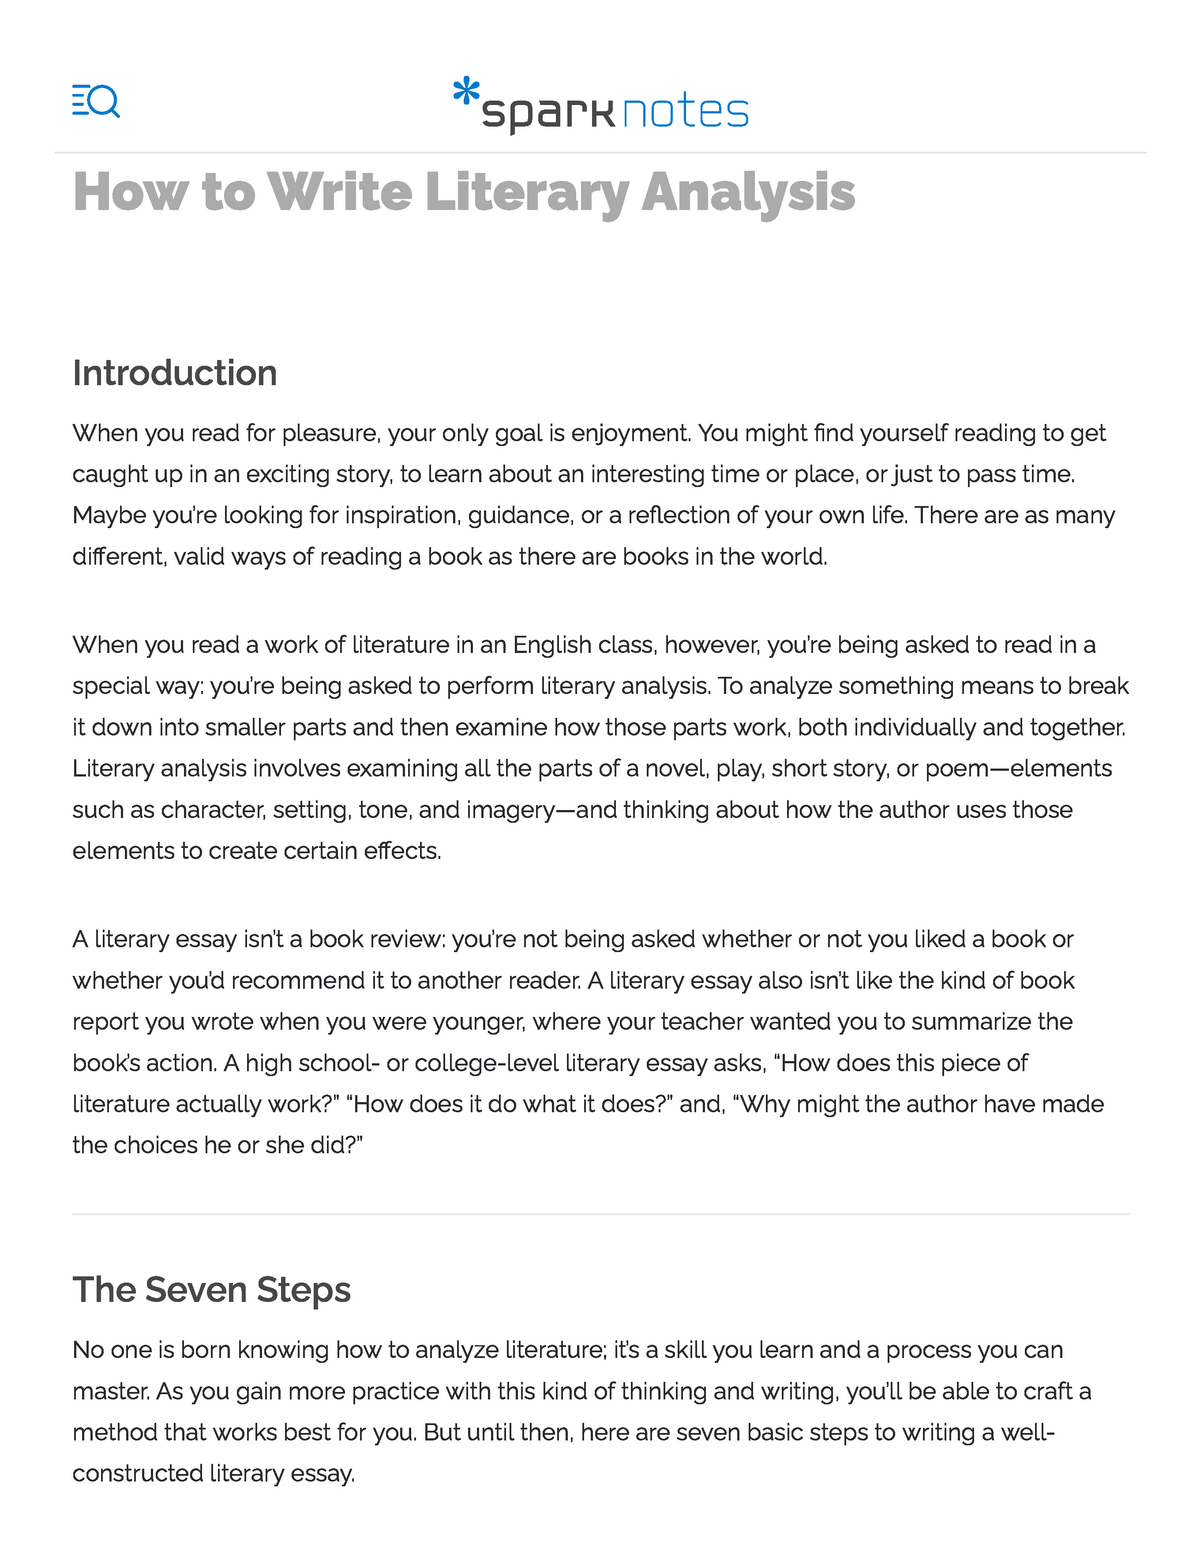 how to write an analytical essay on a short story